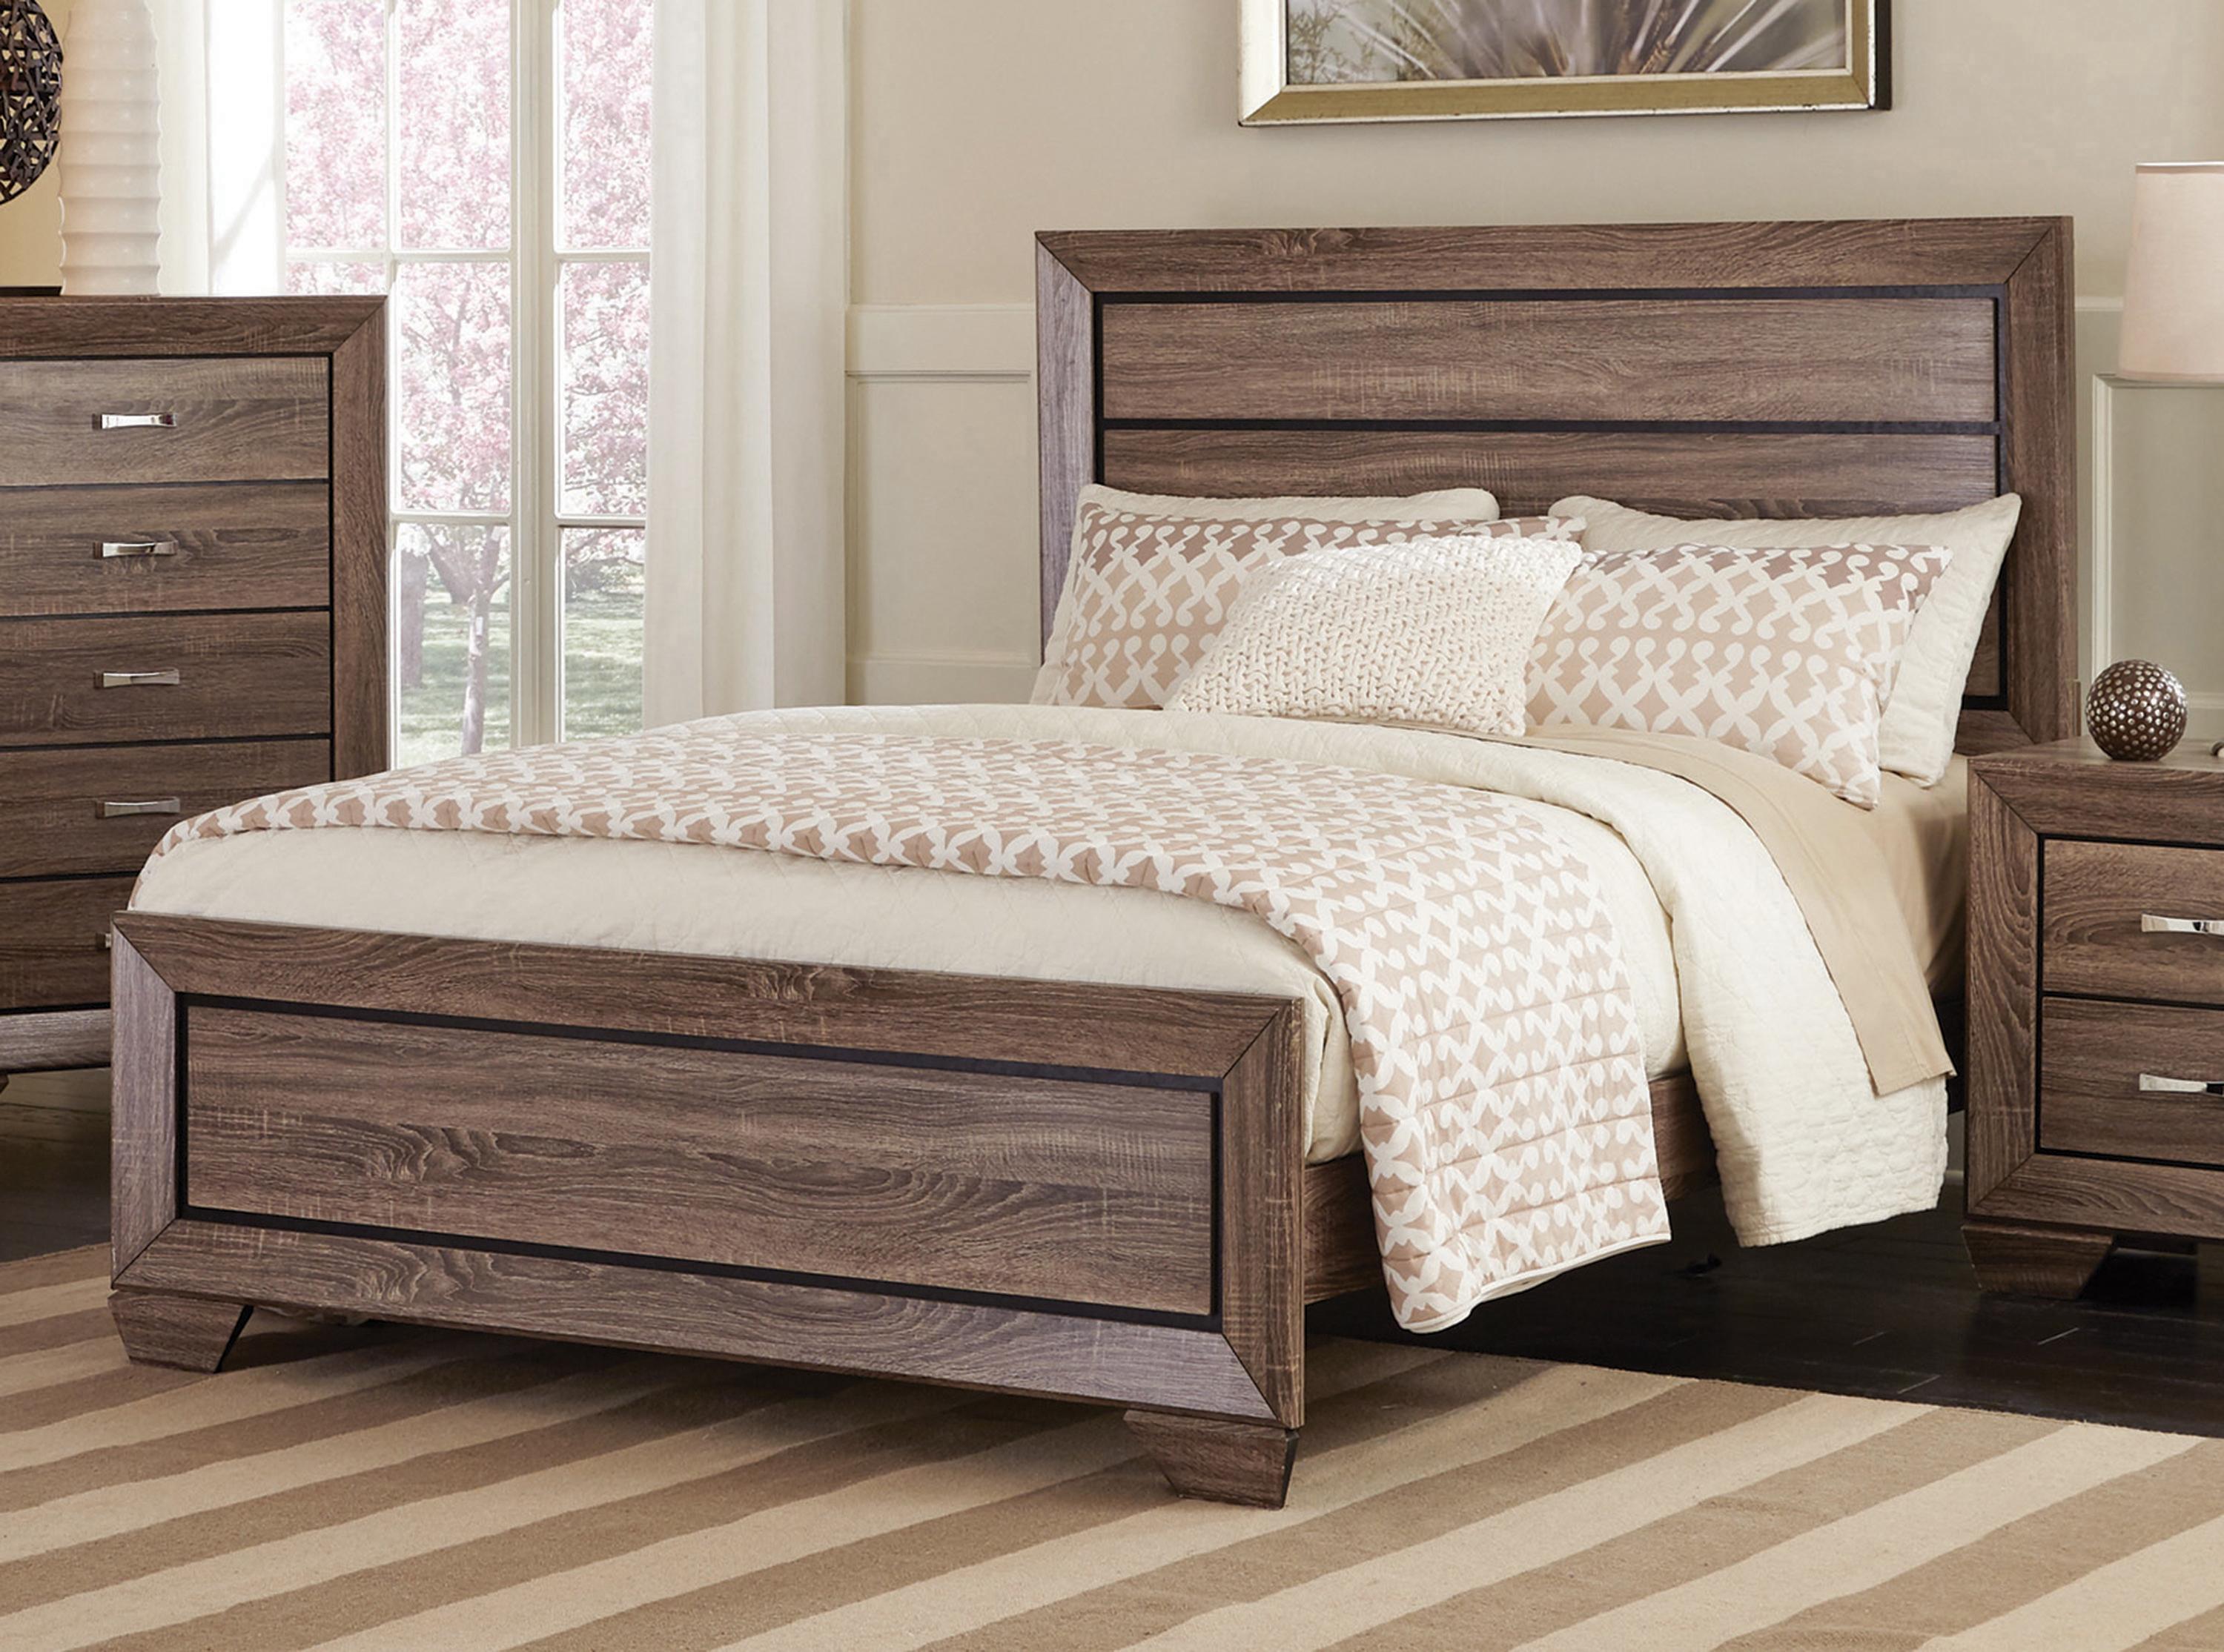 

    
Transitional Washed Taupe Wood Queen Bedroom Set 5pcs Coaster 204191Q Kauffman
